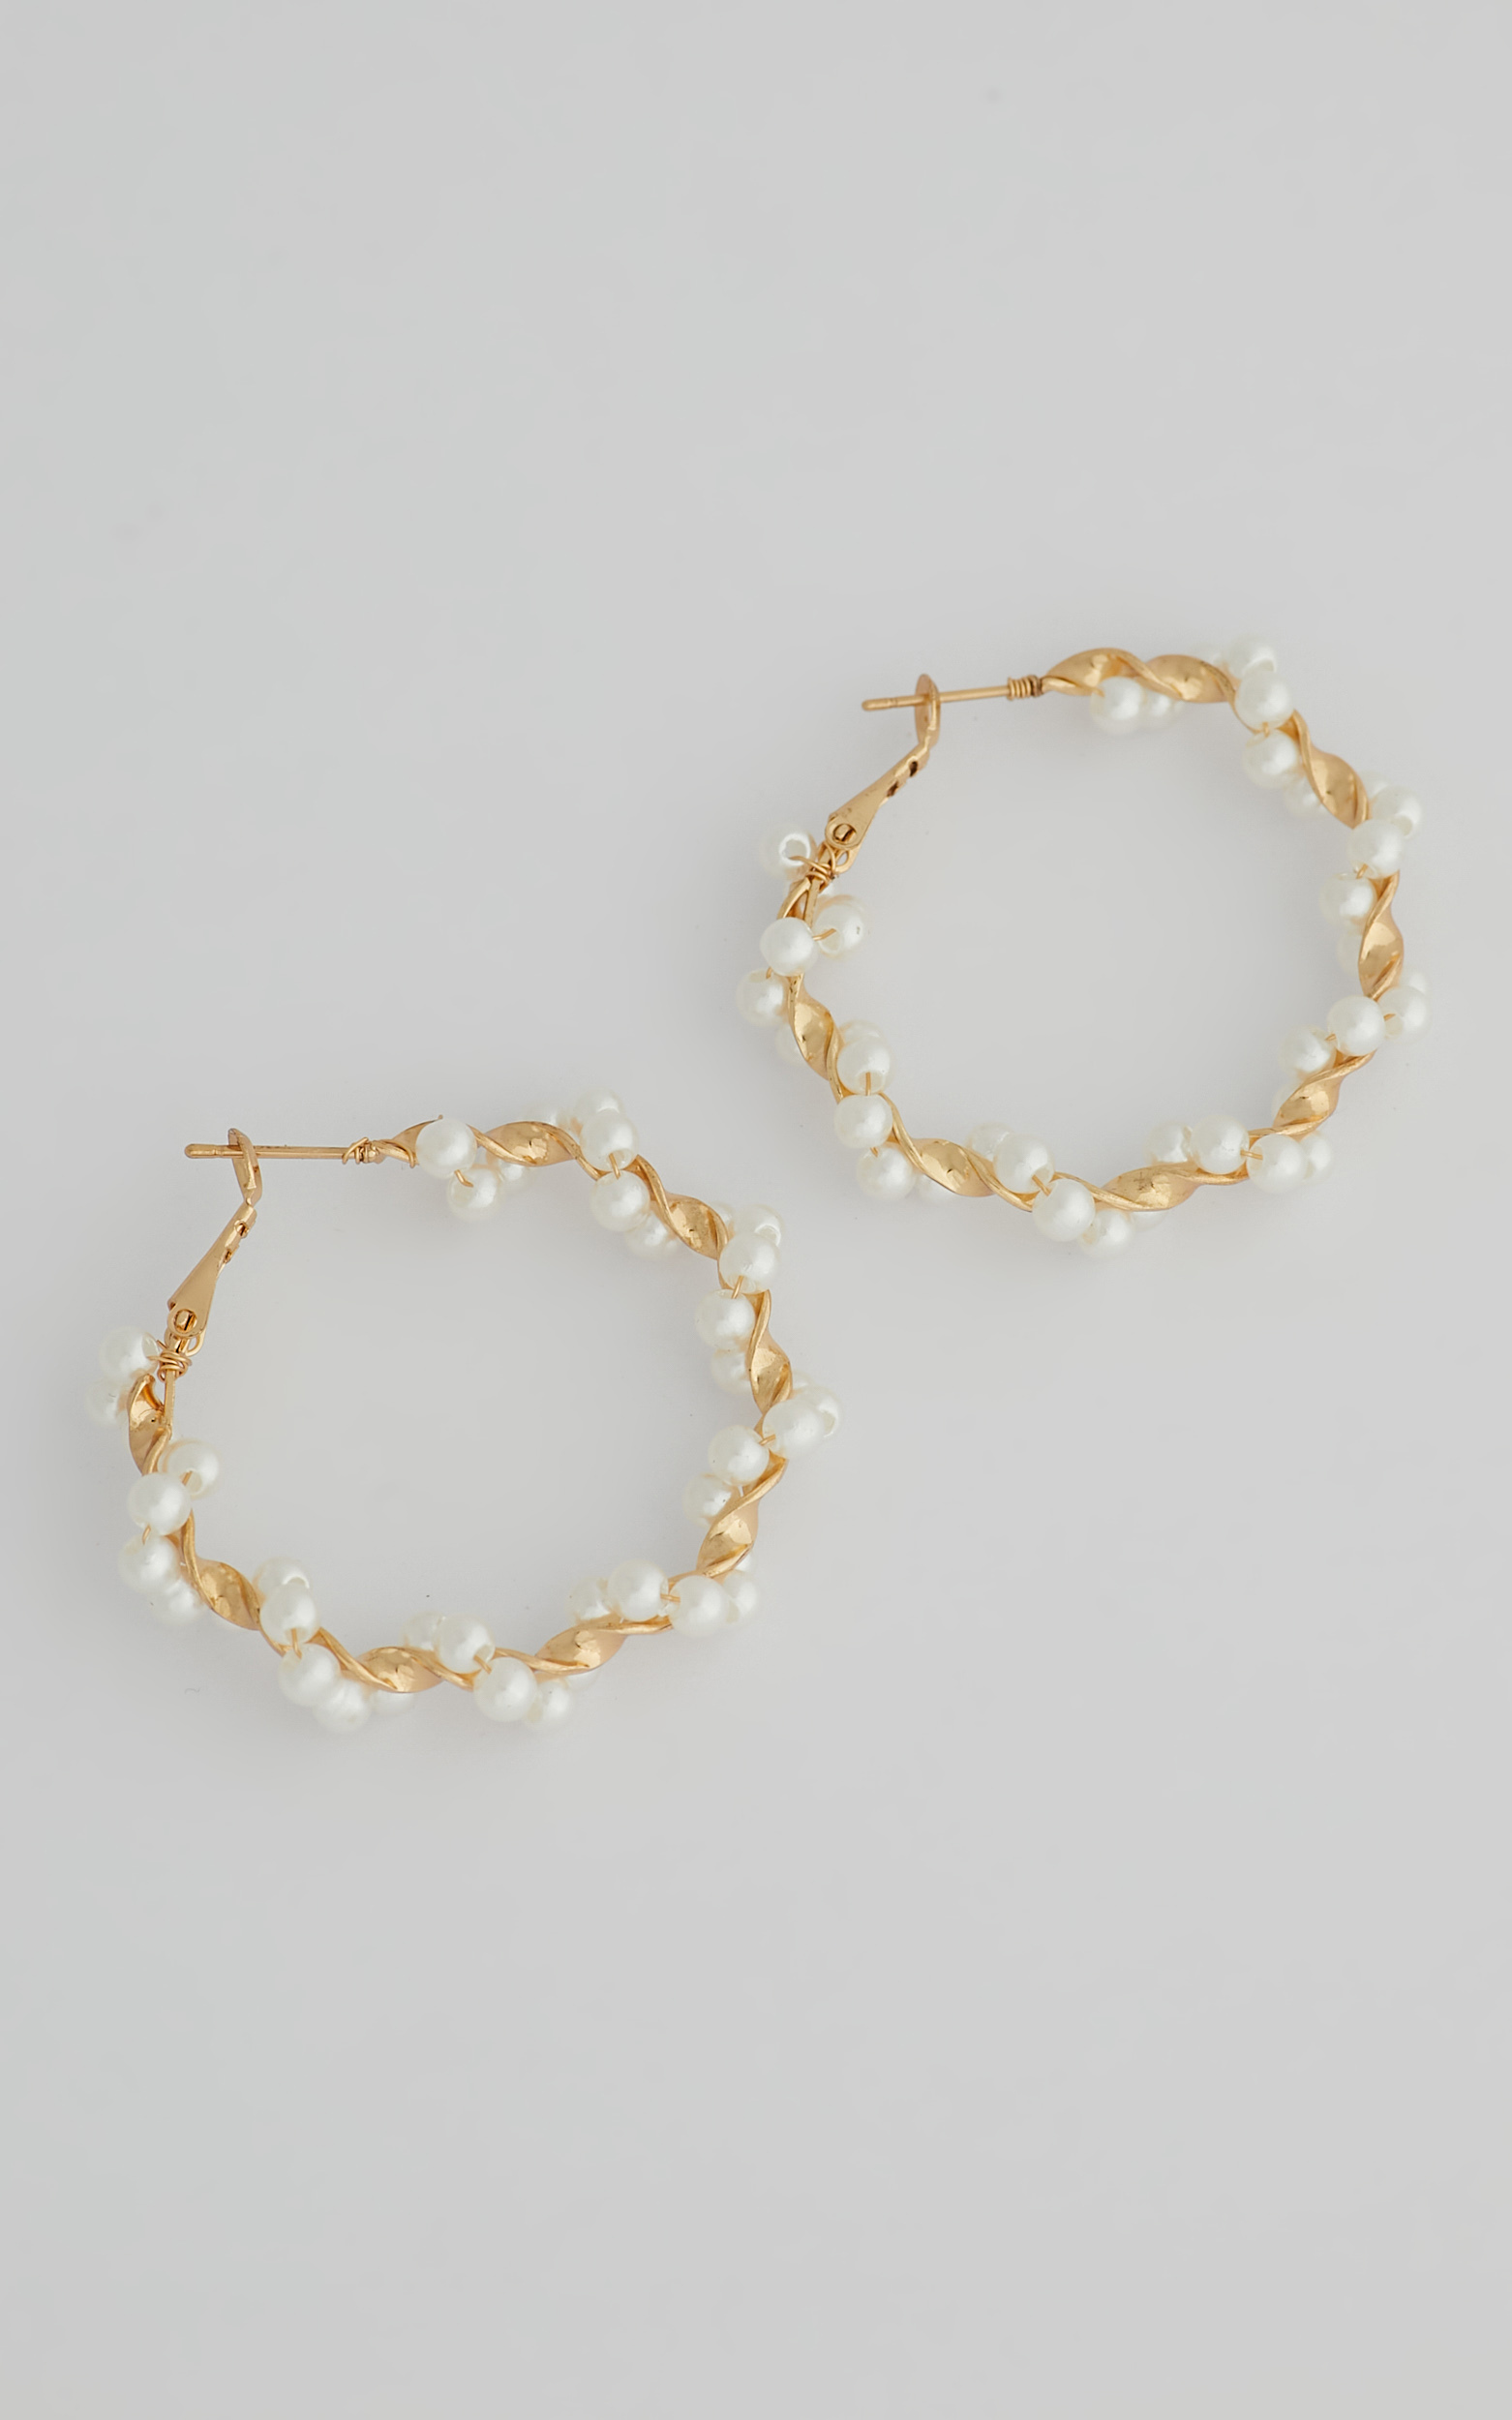 Bev Hoop Earrings in Gold and Pearl - NoSize, GLD1, hi-res image number null